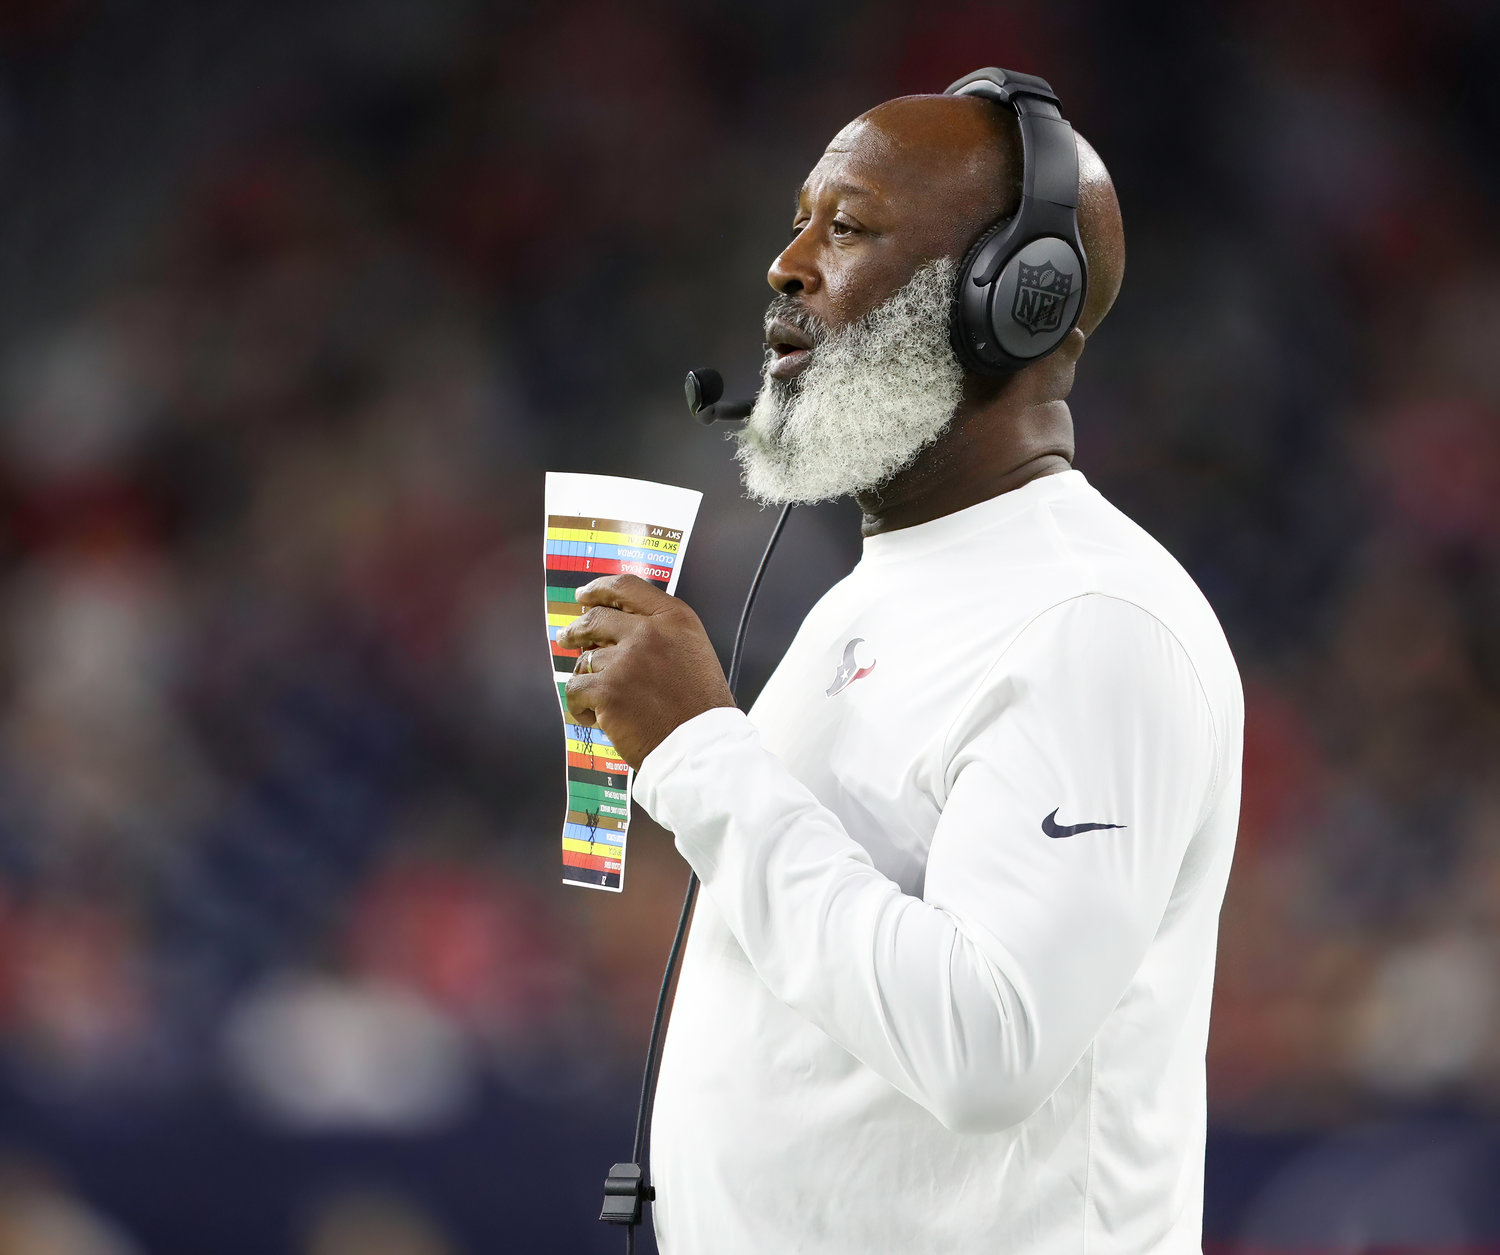 Houston Texans head coach Lovie Smith during an NFL preseason game between the Texans and the 49ers in Houston, Texas, on August 25, 2022.